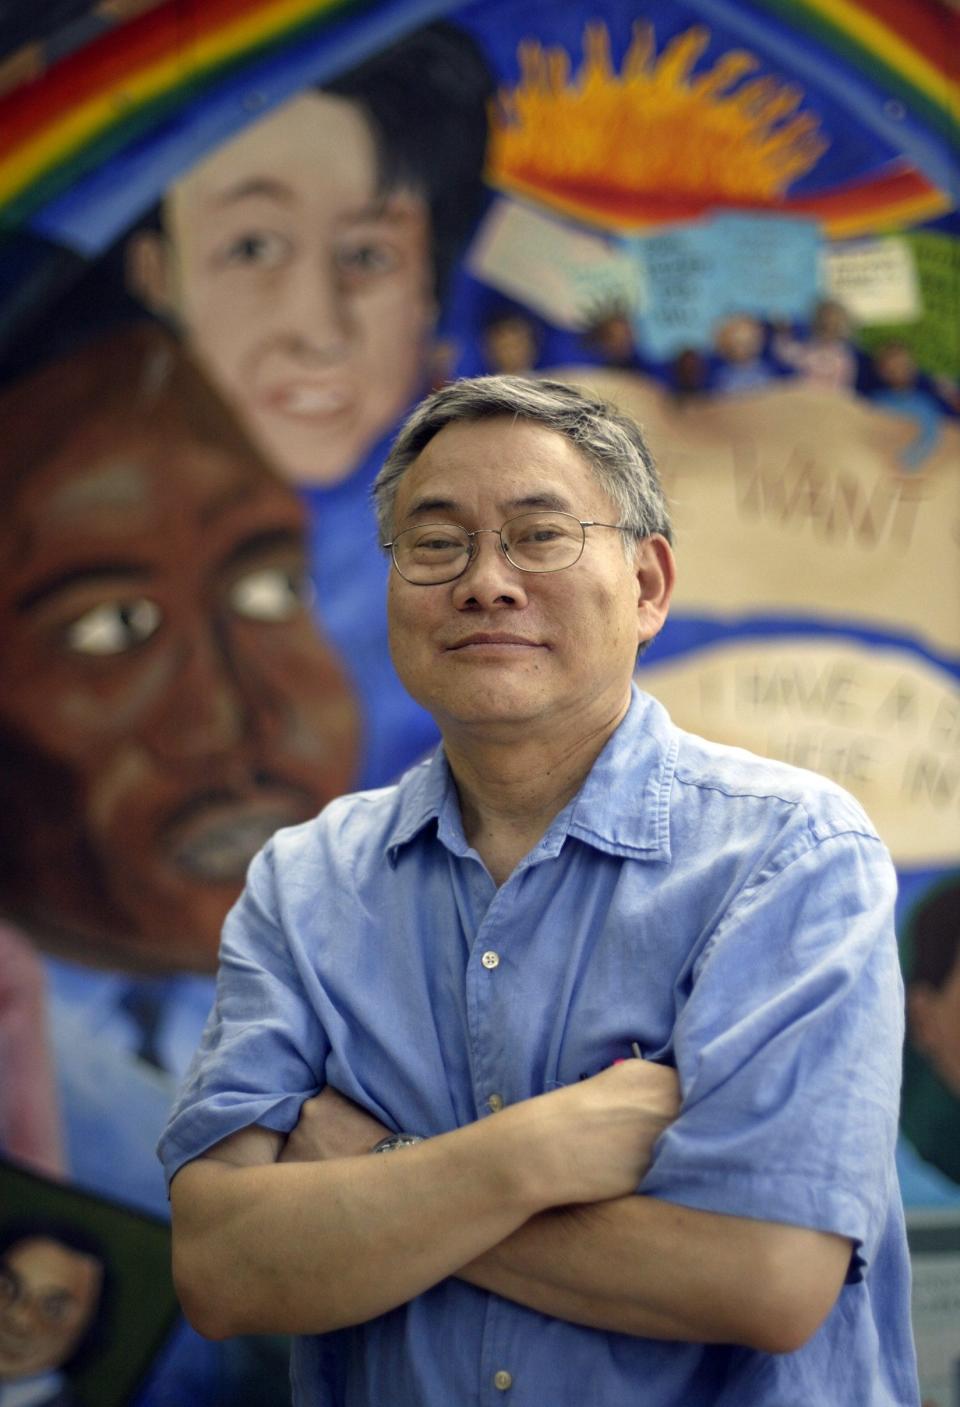 Roland Hwang, a Northville attorney, helped found American Citizens for Justice, an Asian American advocacy group in metro Detroit, after the killing of Vincent Chin in Highland Park in 1982. He is photographed in June 2008.